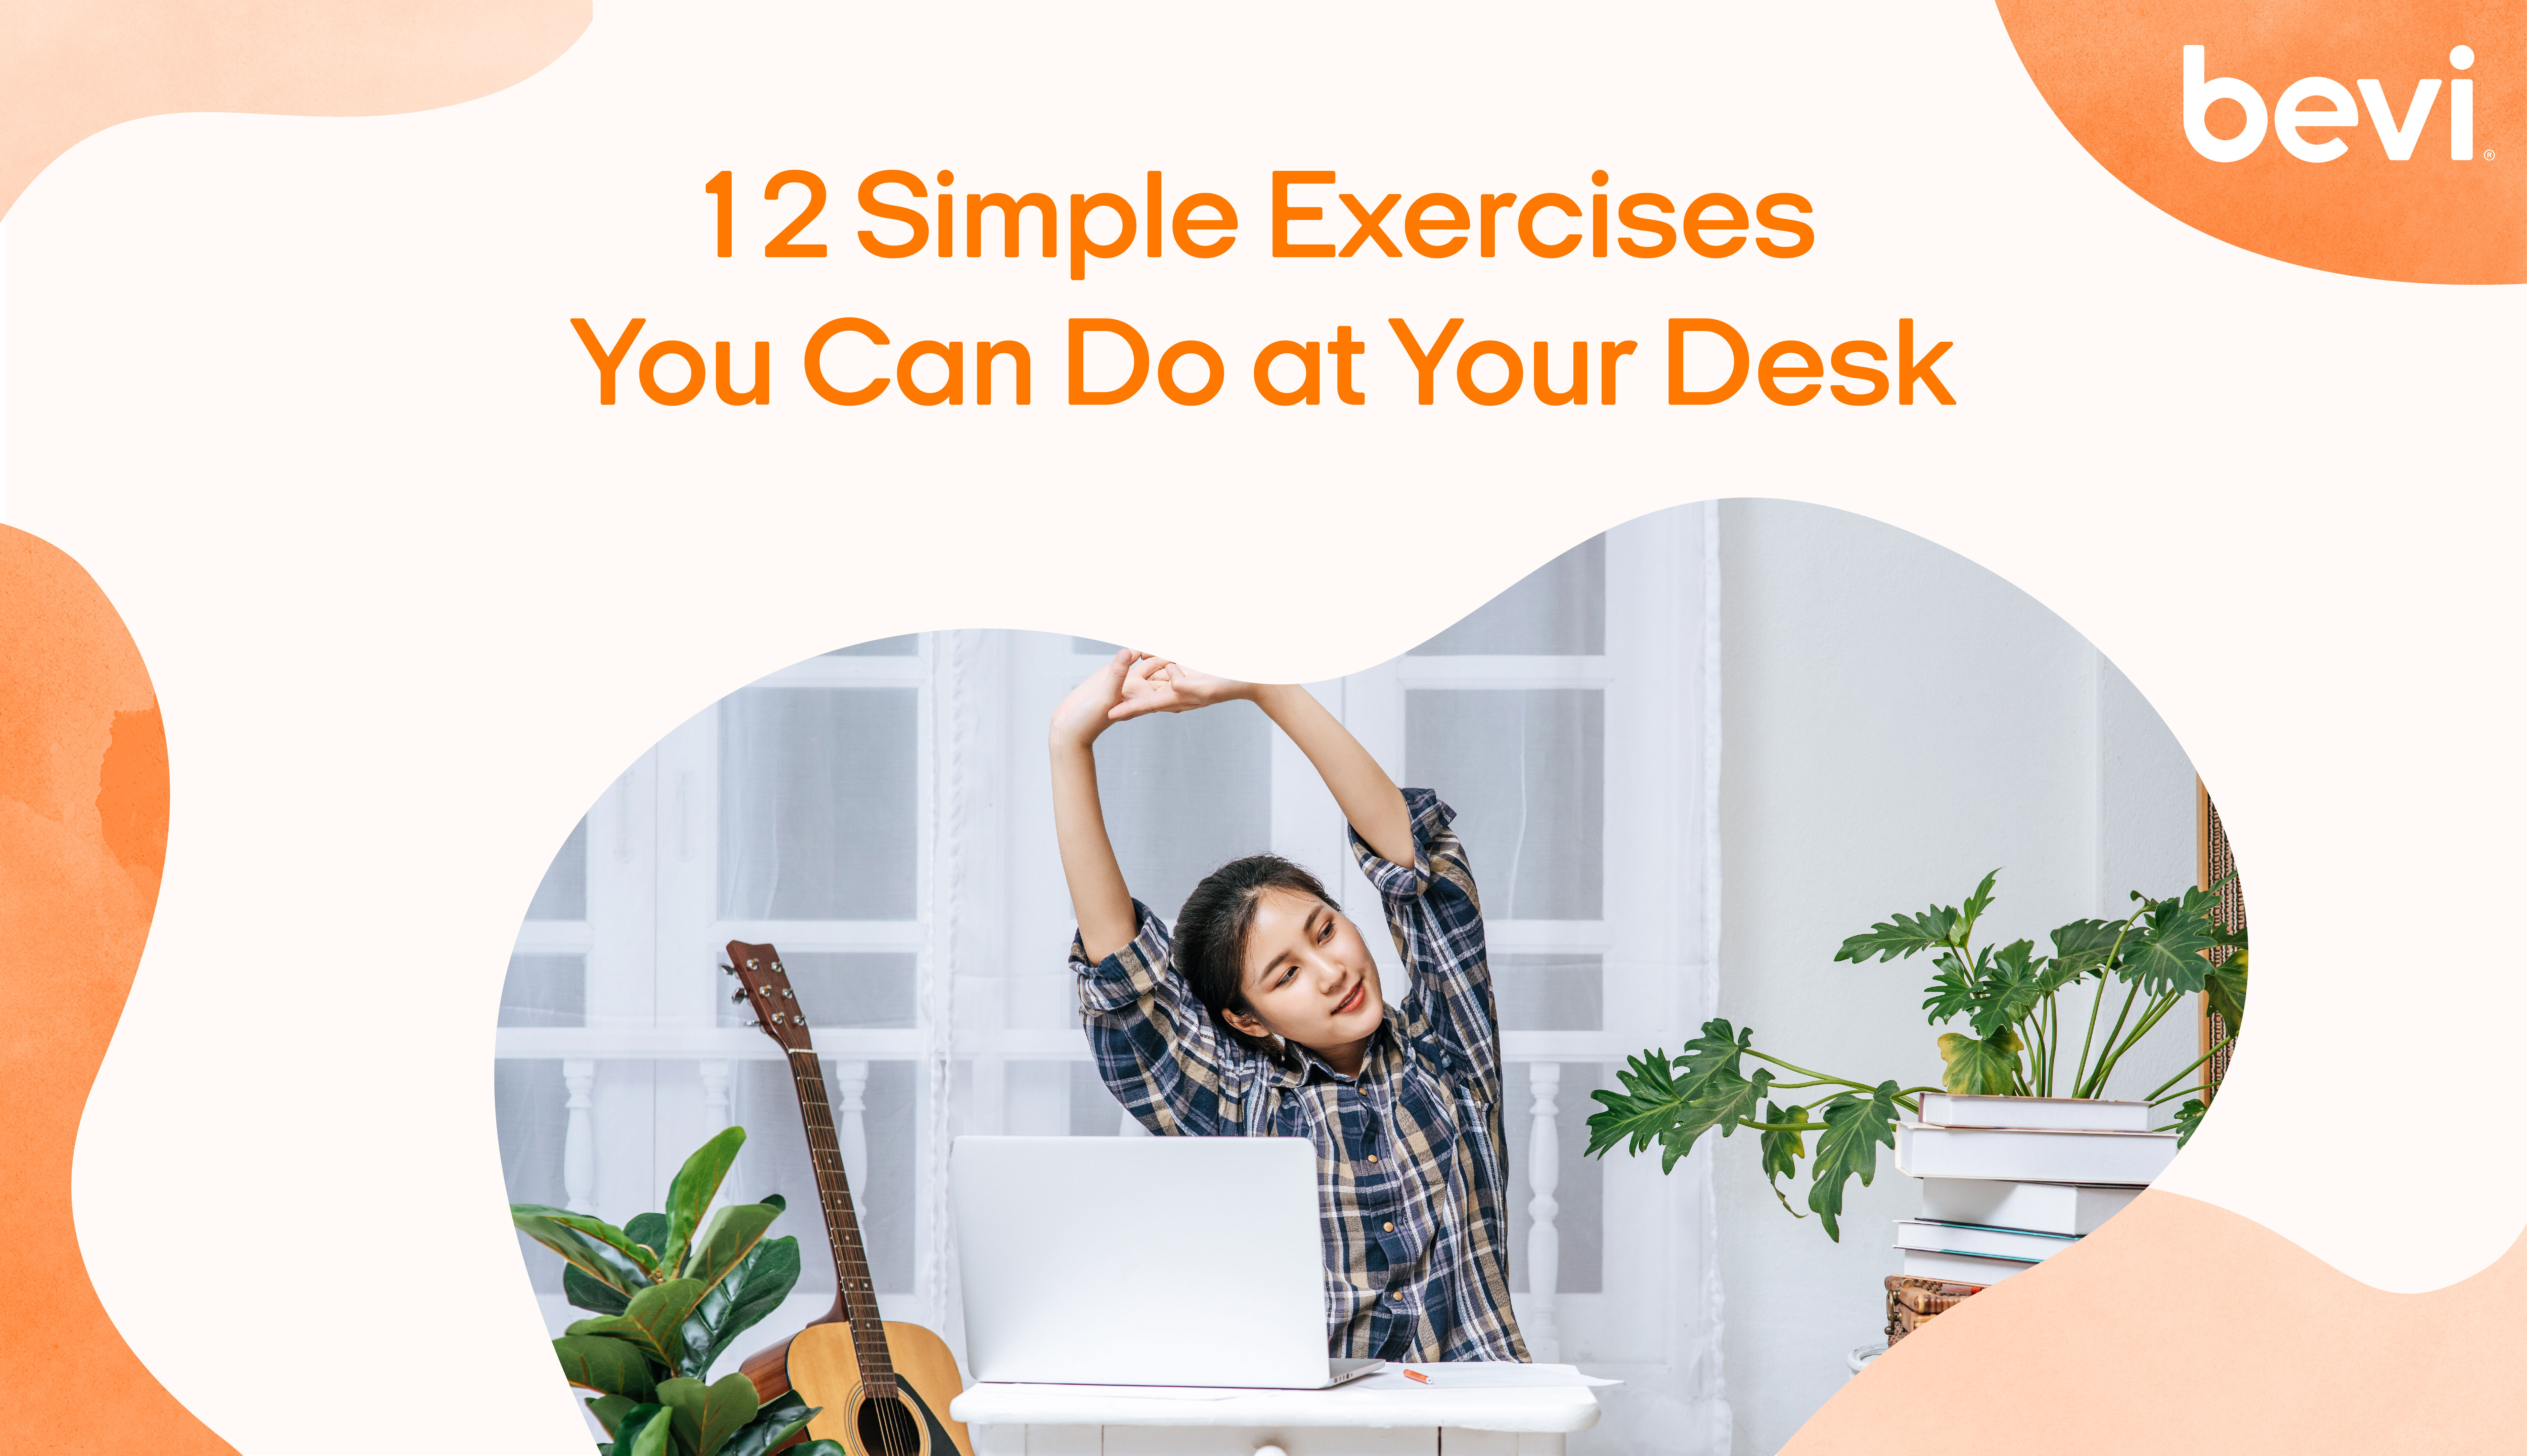 12 Simple Exercises You Can Do at Your Desk